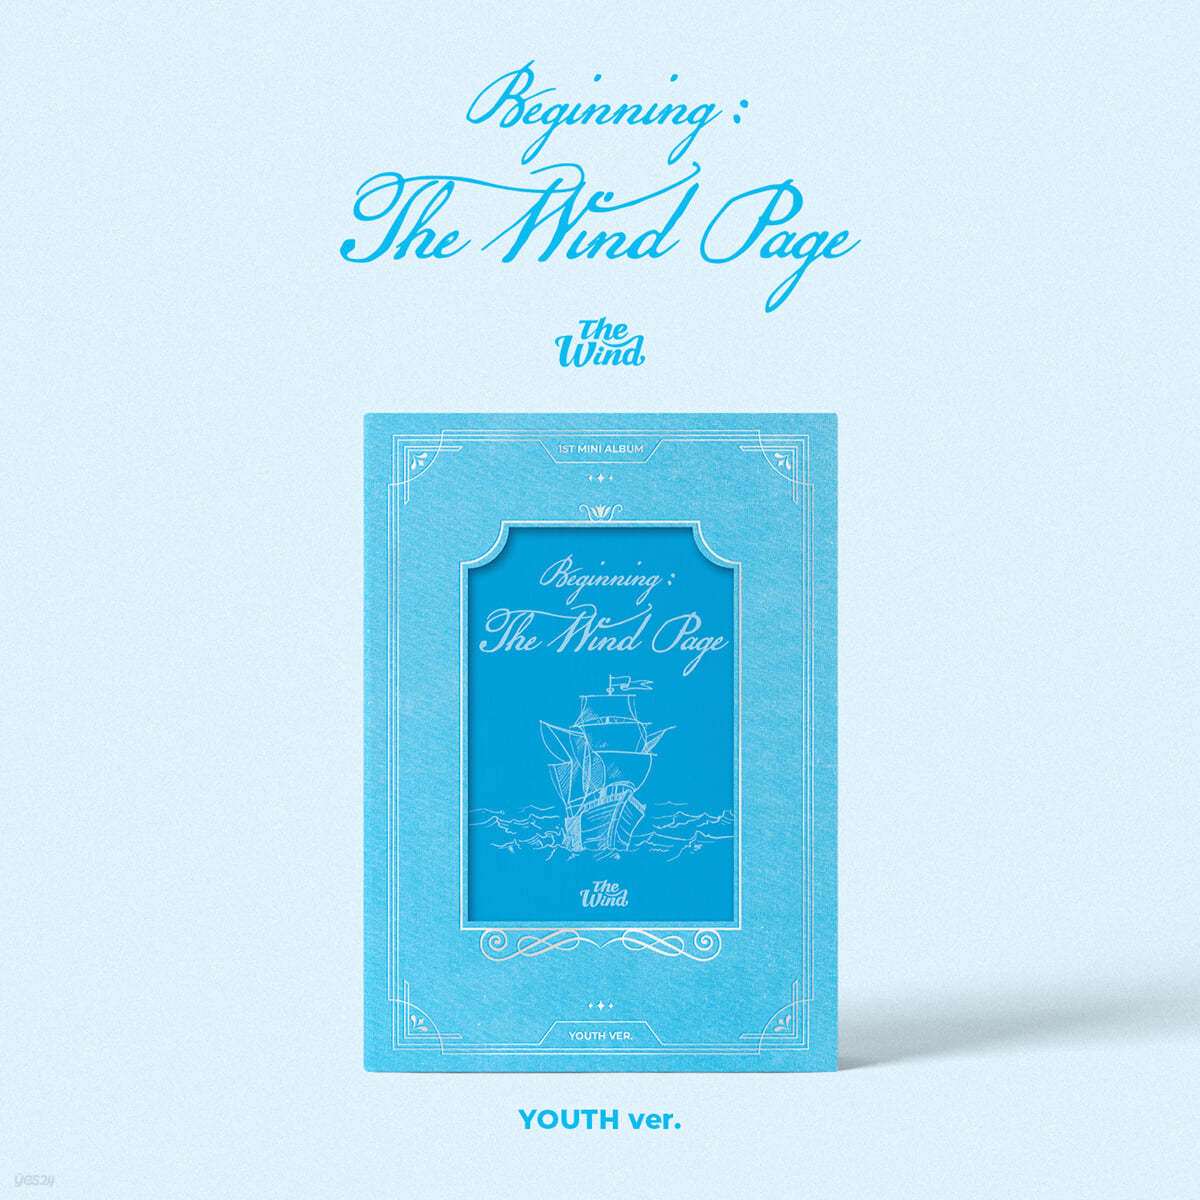 The Wind (더윈드) - 미니앨범 1집 [Beginning : The Wind Page][YOUTH VER.]